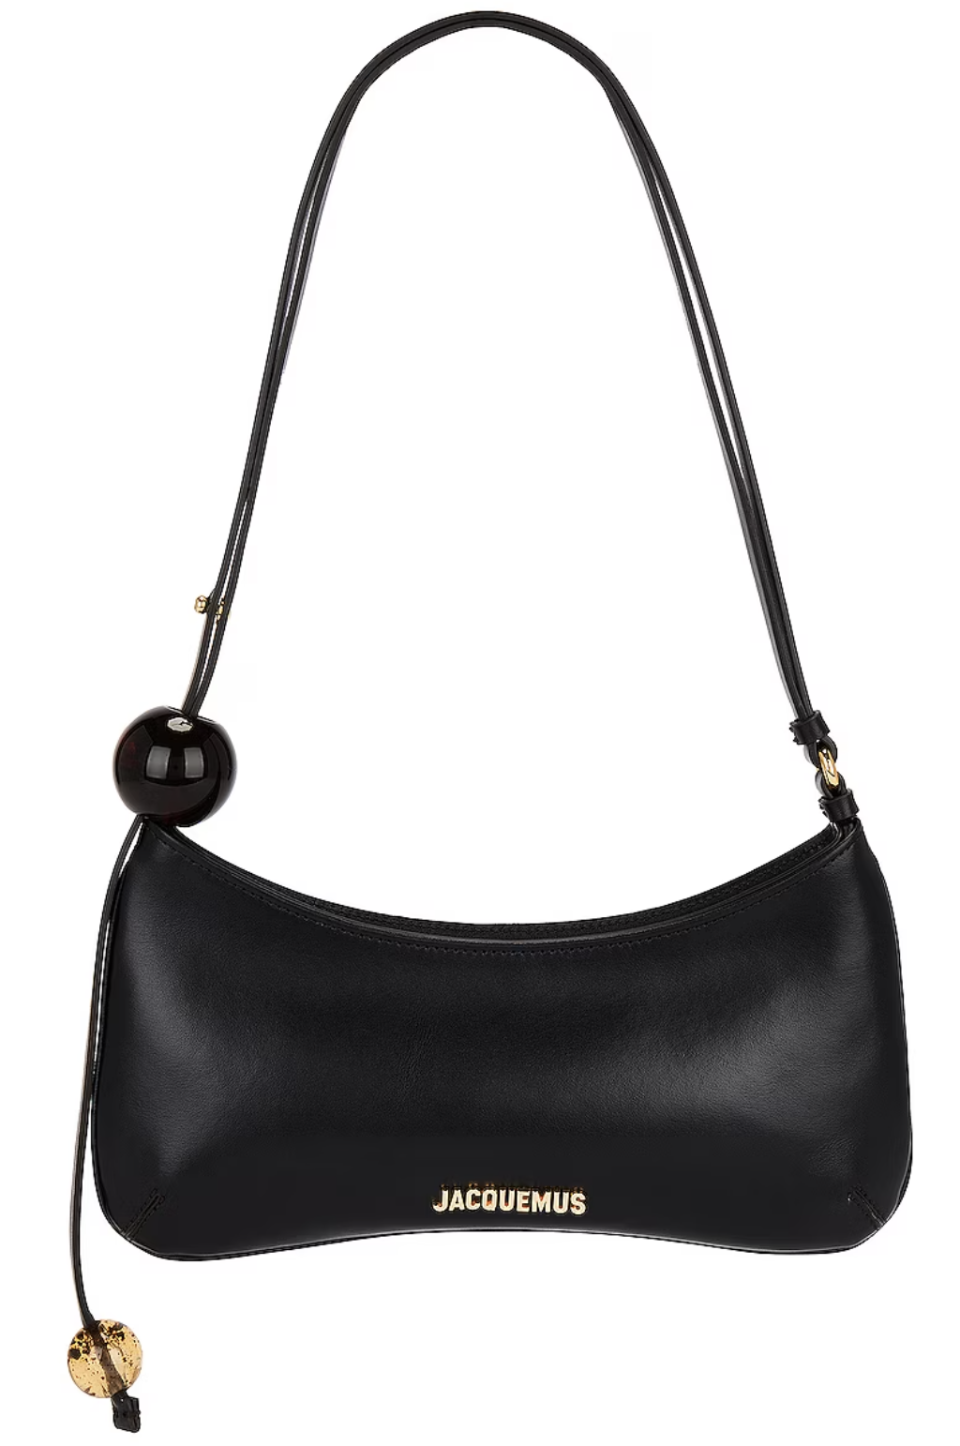 black shoulder purse with brand's logo in gold